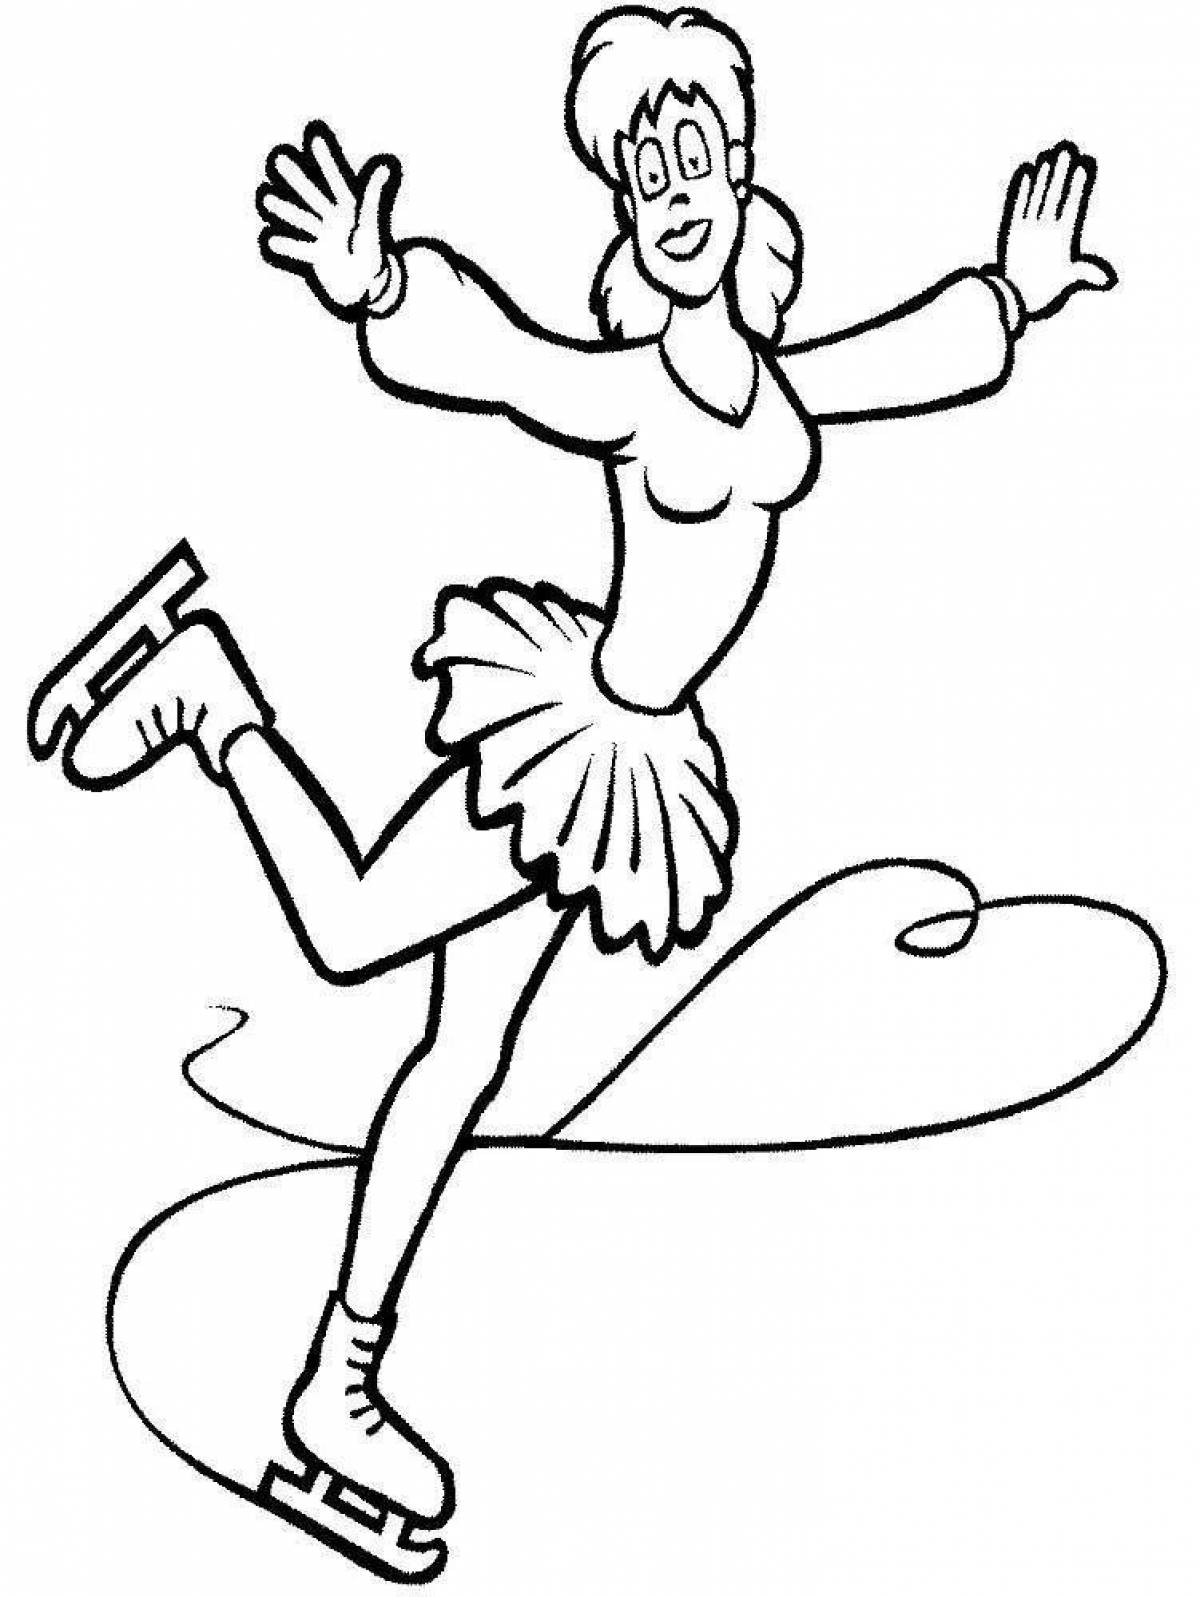 Great skater coloring pages for kids